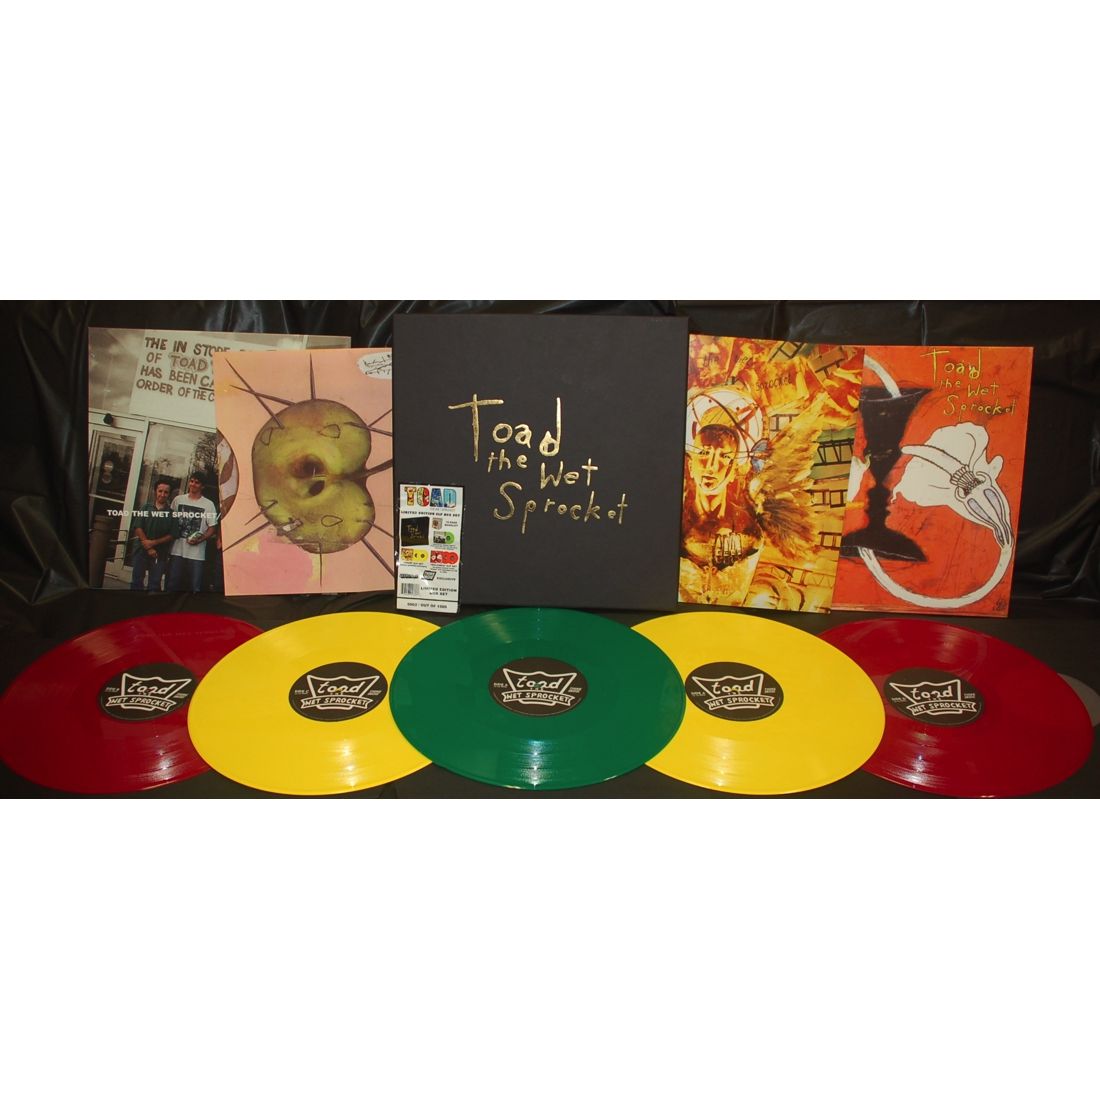 TOAD THE WET SPROCKET / トード・ザ・ウェット・スプロケット / TOAD THE WET SPROCKET BOX SET [COLORED 5LP BOX]